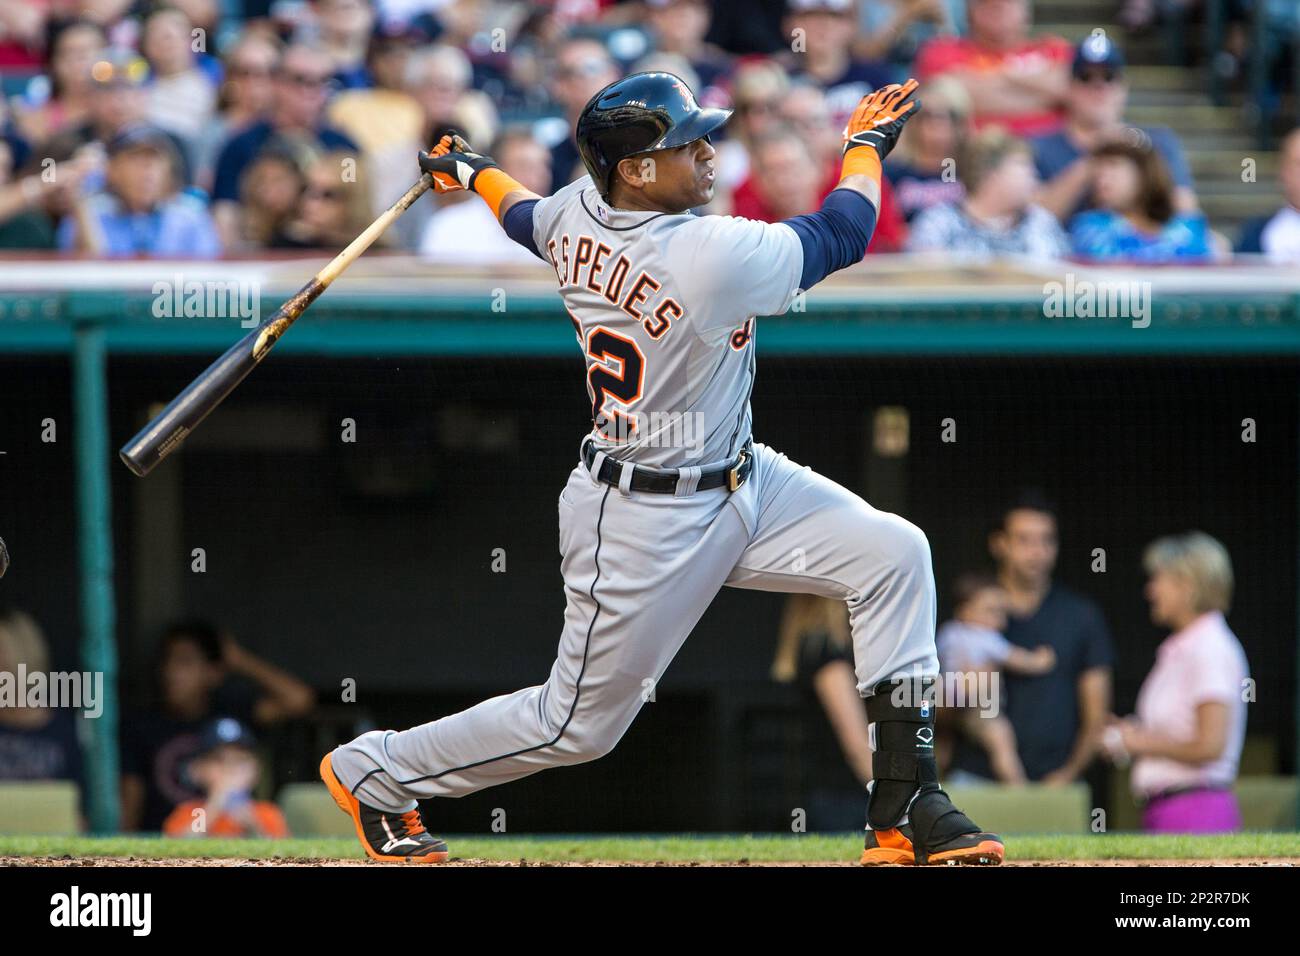 23 June 2015: Detroit Tigers Left field Yoenis Cespedes (52) [6997] at bat  during the game between the Detroit Tigers and Cleveland Indians at  Progressive Field in Cleveland, OH. Detroit defeated Cleveland